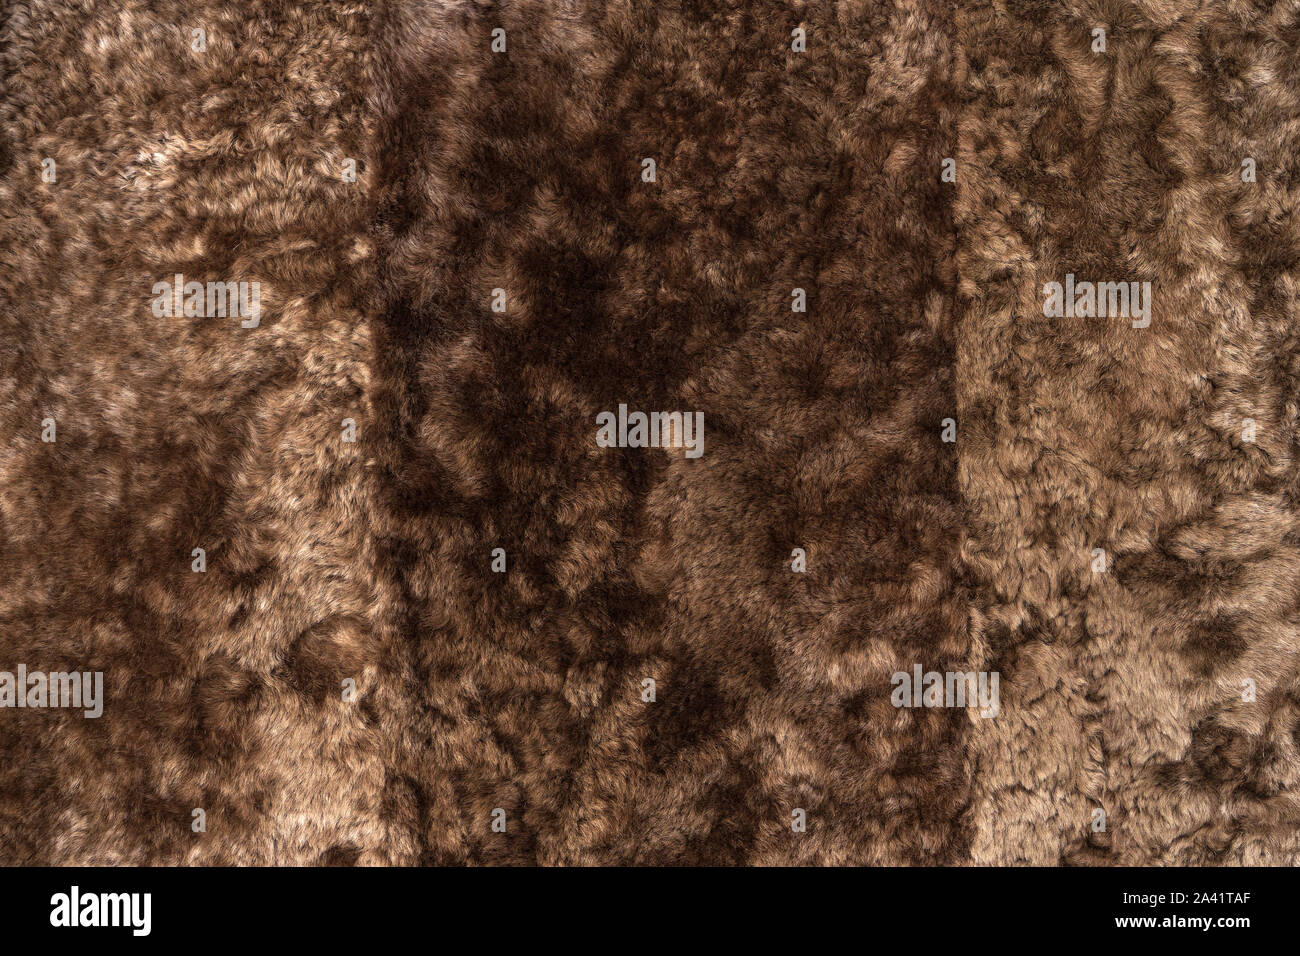 Natural fur sample. Surface made of brown wool. Luxury coat or scarf. Abstract textured background with copy space. Stock Photo